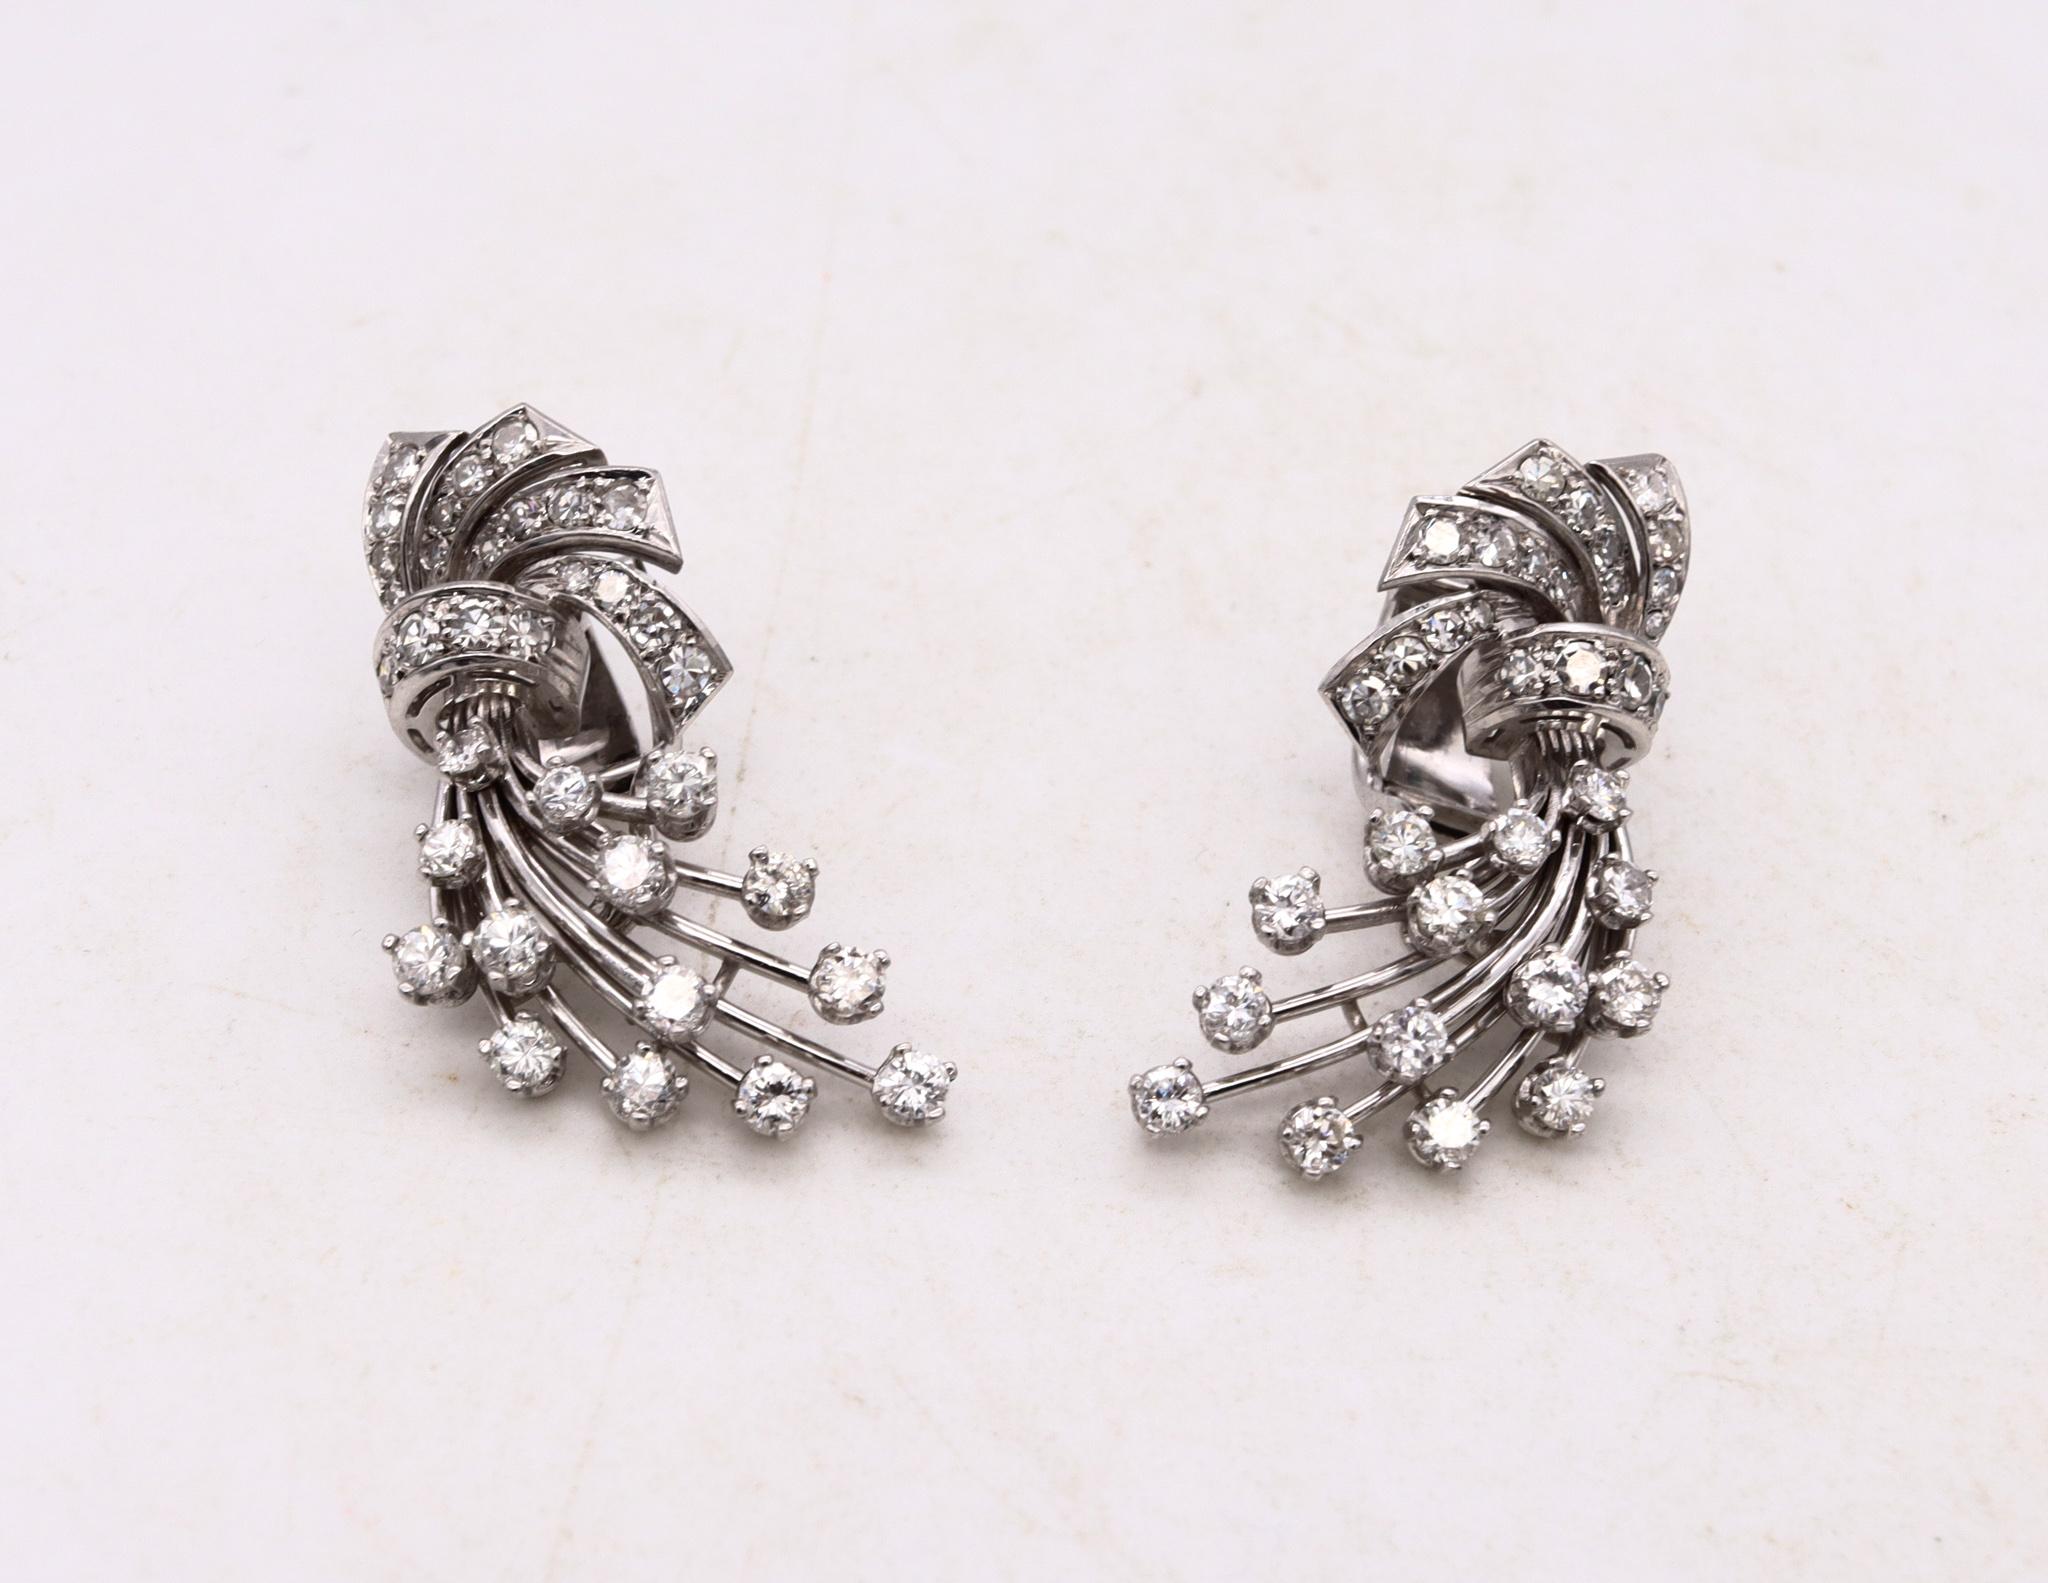 Women's Art Deco Late 1930 Clips on Earrings in Platinum with 2.88 Cts in VS Diamonds